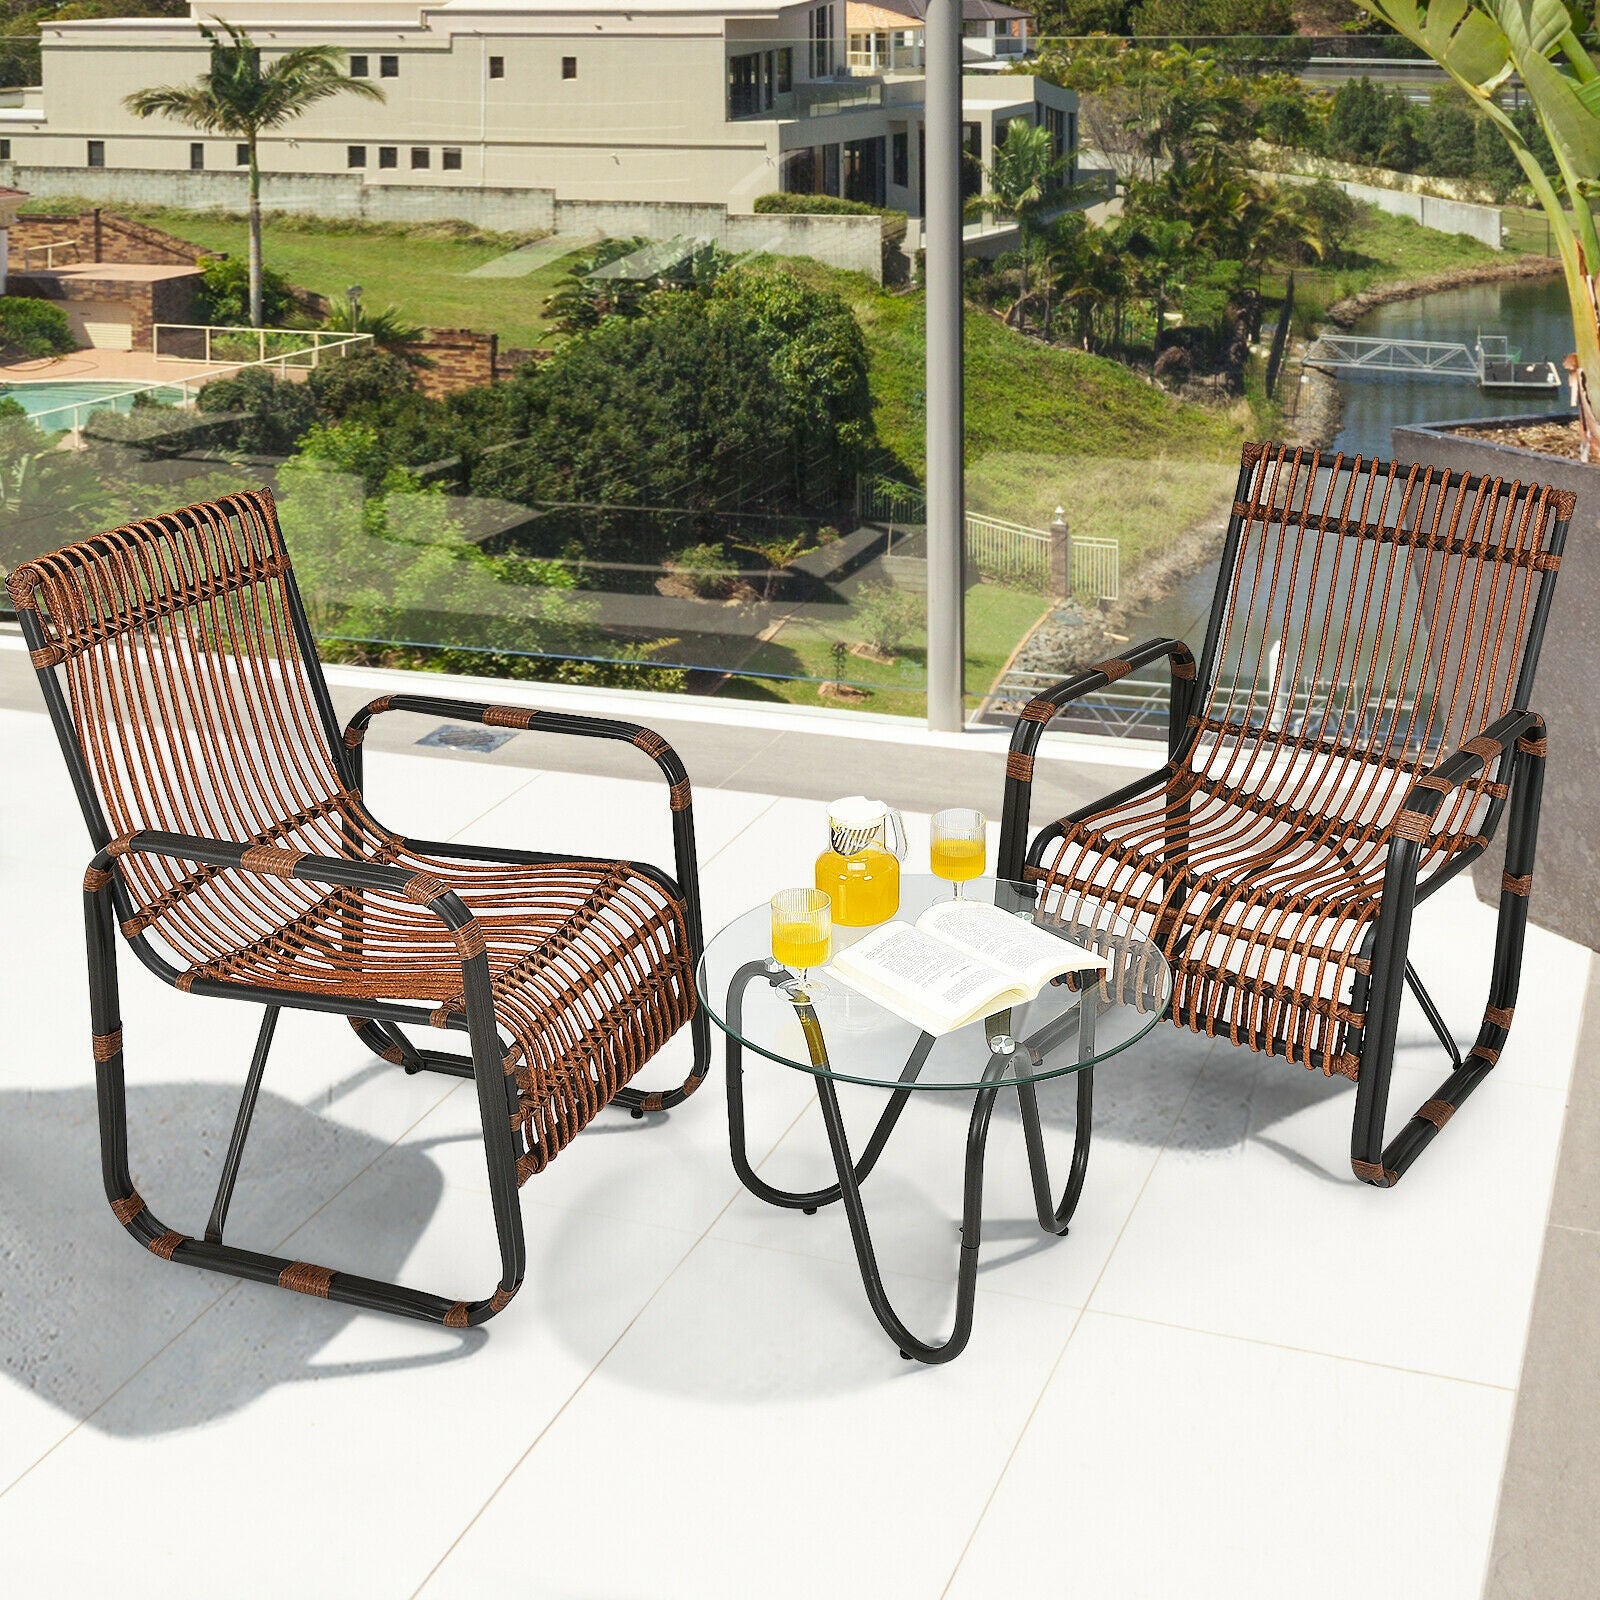 Patiojoy 3PCS Patio Rattan Furniture Set Conversational Sofa Coffee Table Garden HW64404 - Home Decor Gifts and More